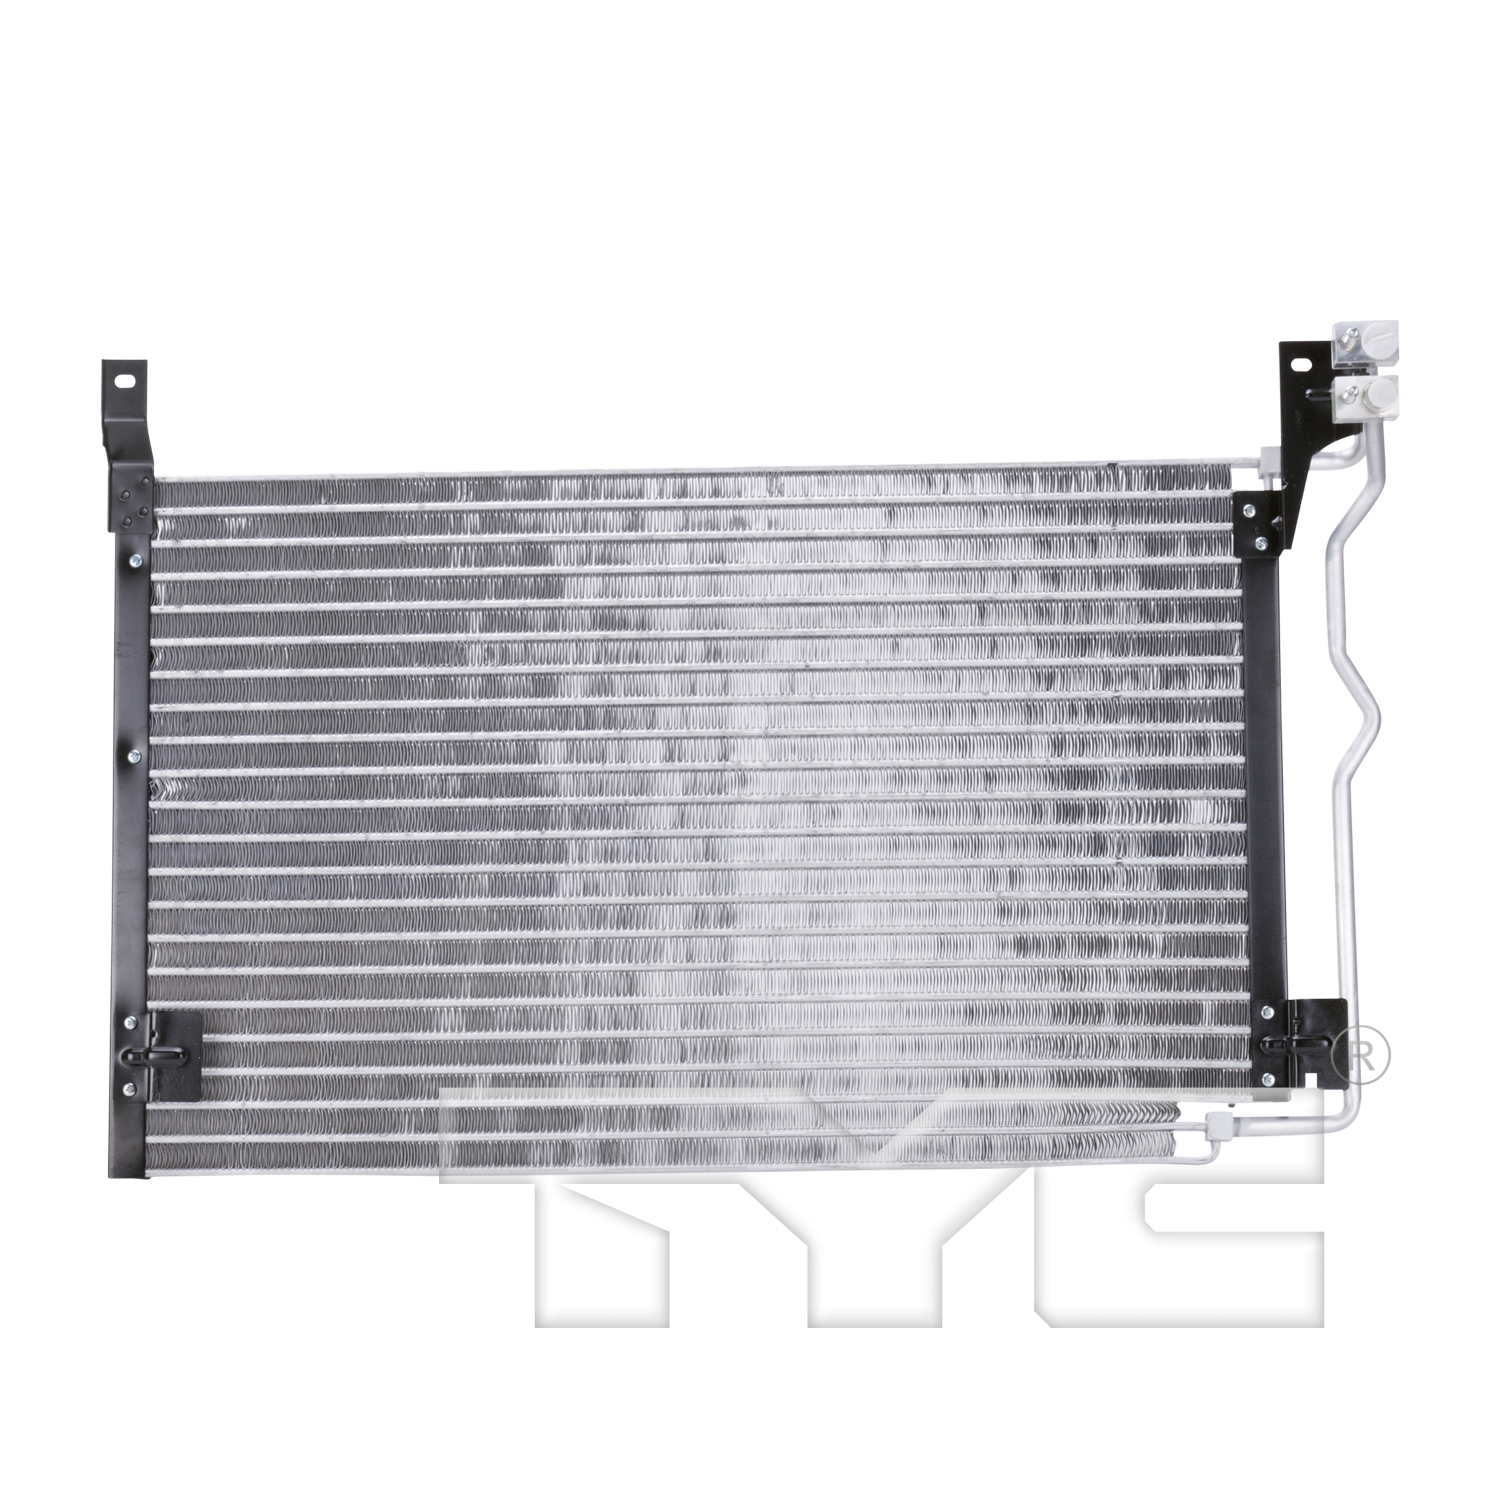 Aftermarket AC CONDENSERS for MERCURY - GRAND MARQUIS, GRAND MARQUIS,03-05,Air conditioning condenser